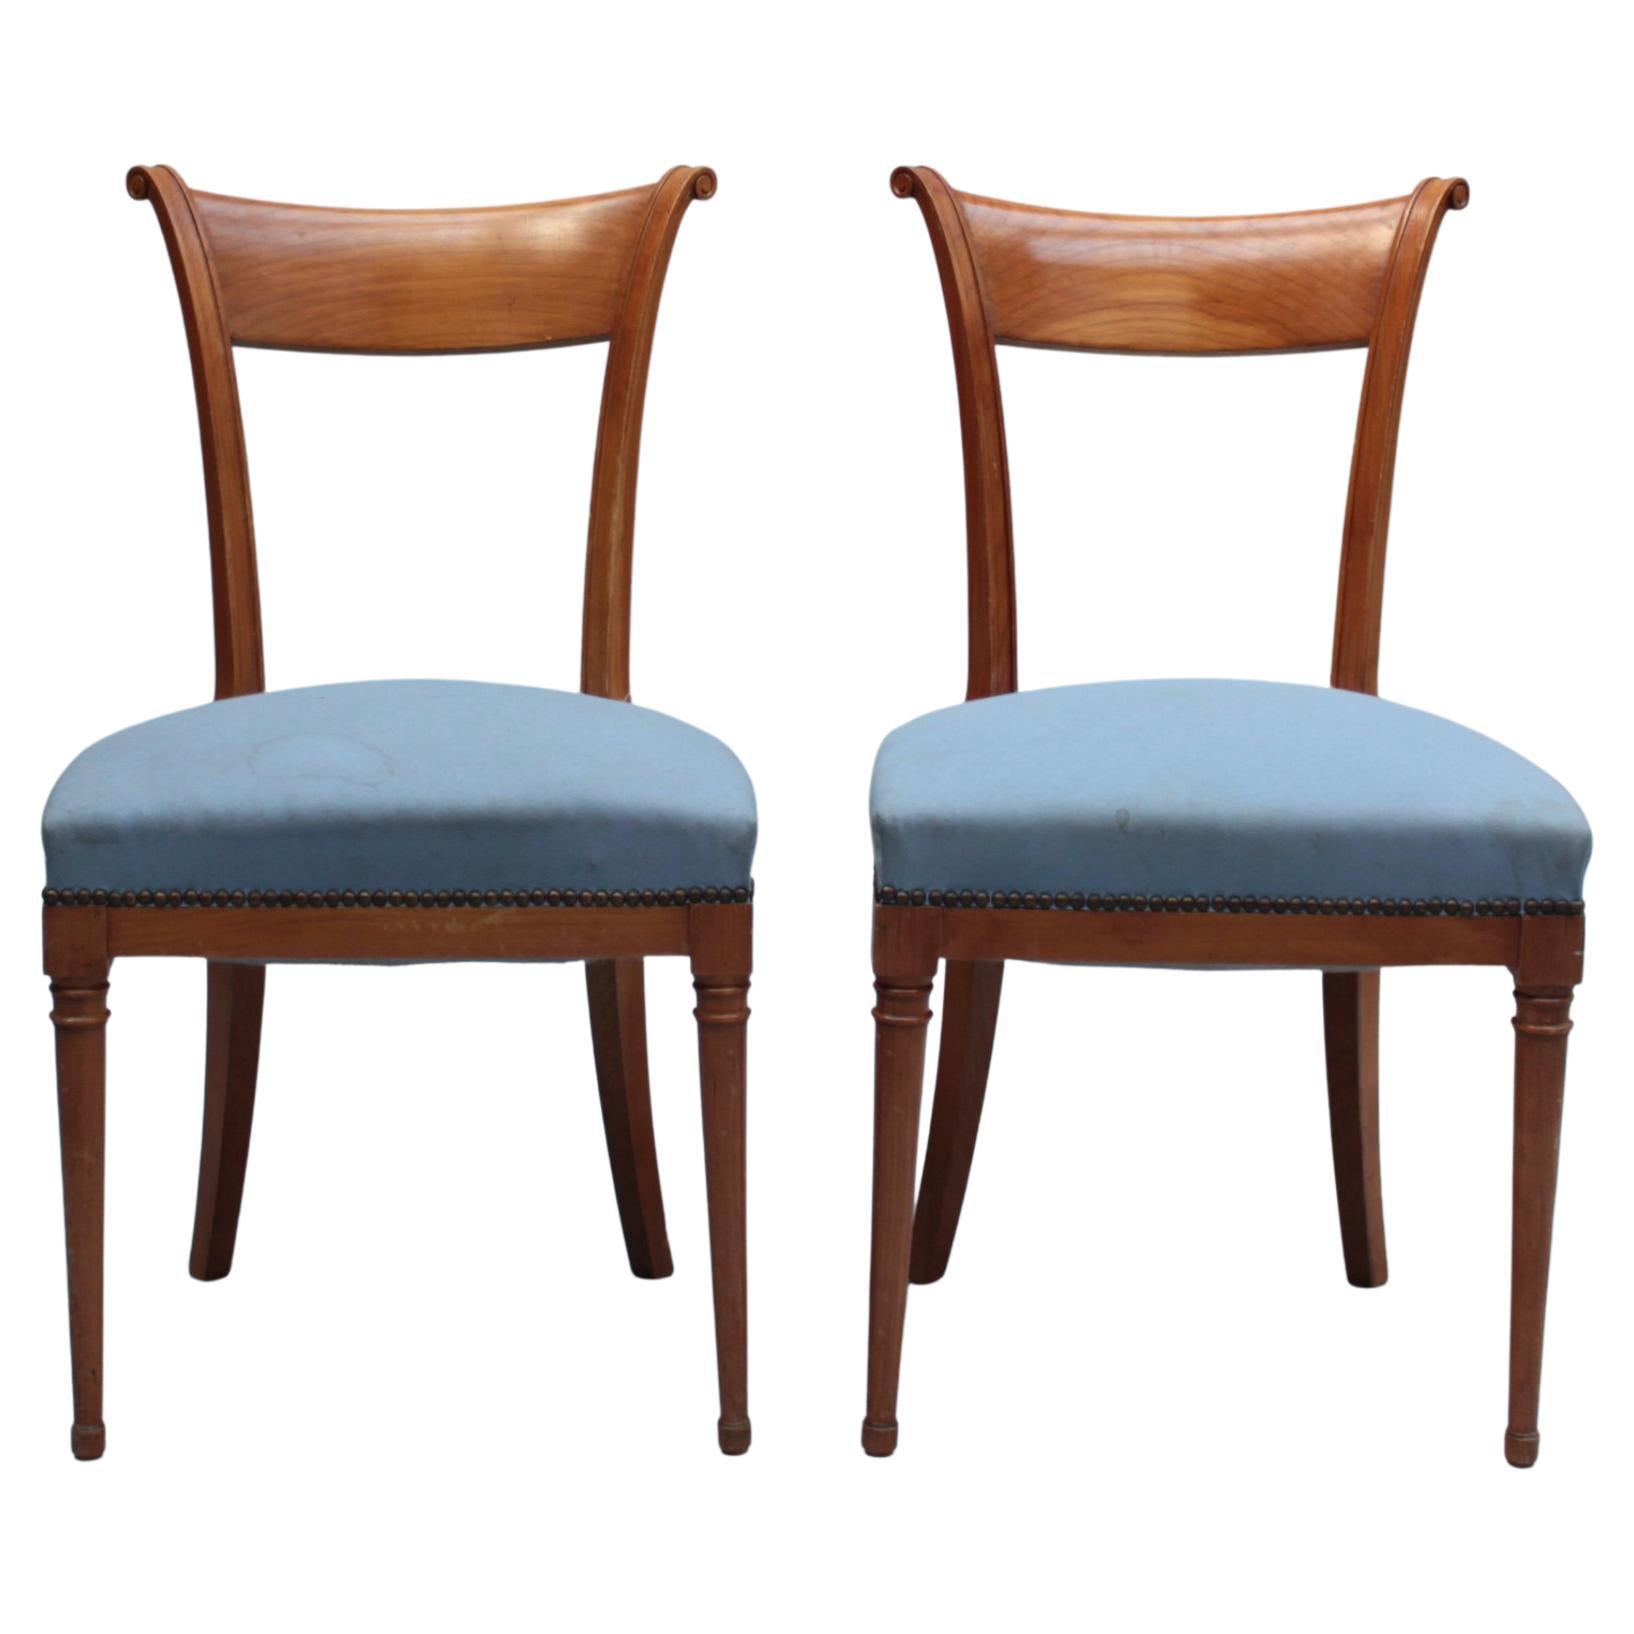 A Pair of Fine French Art Deco Cherry Wood Side Chairs For Sale